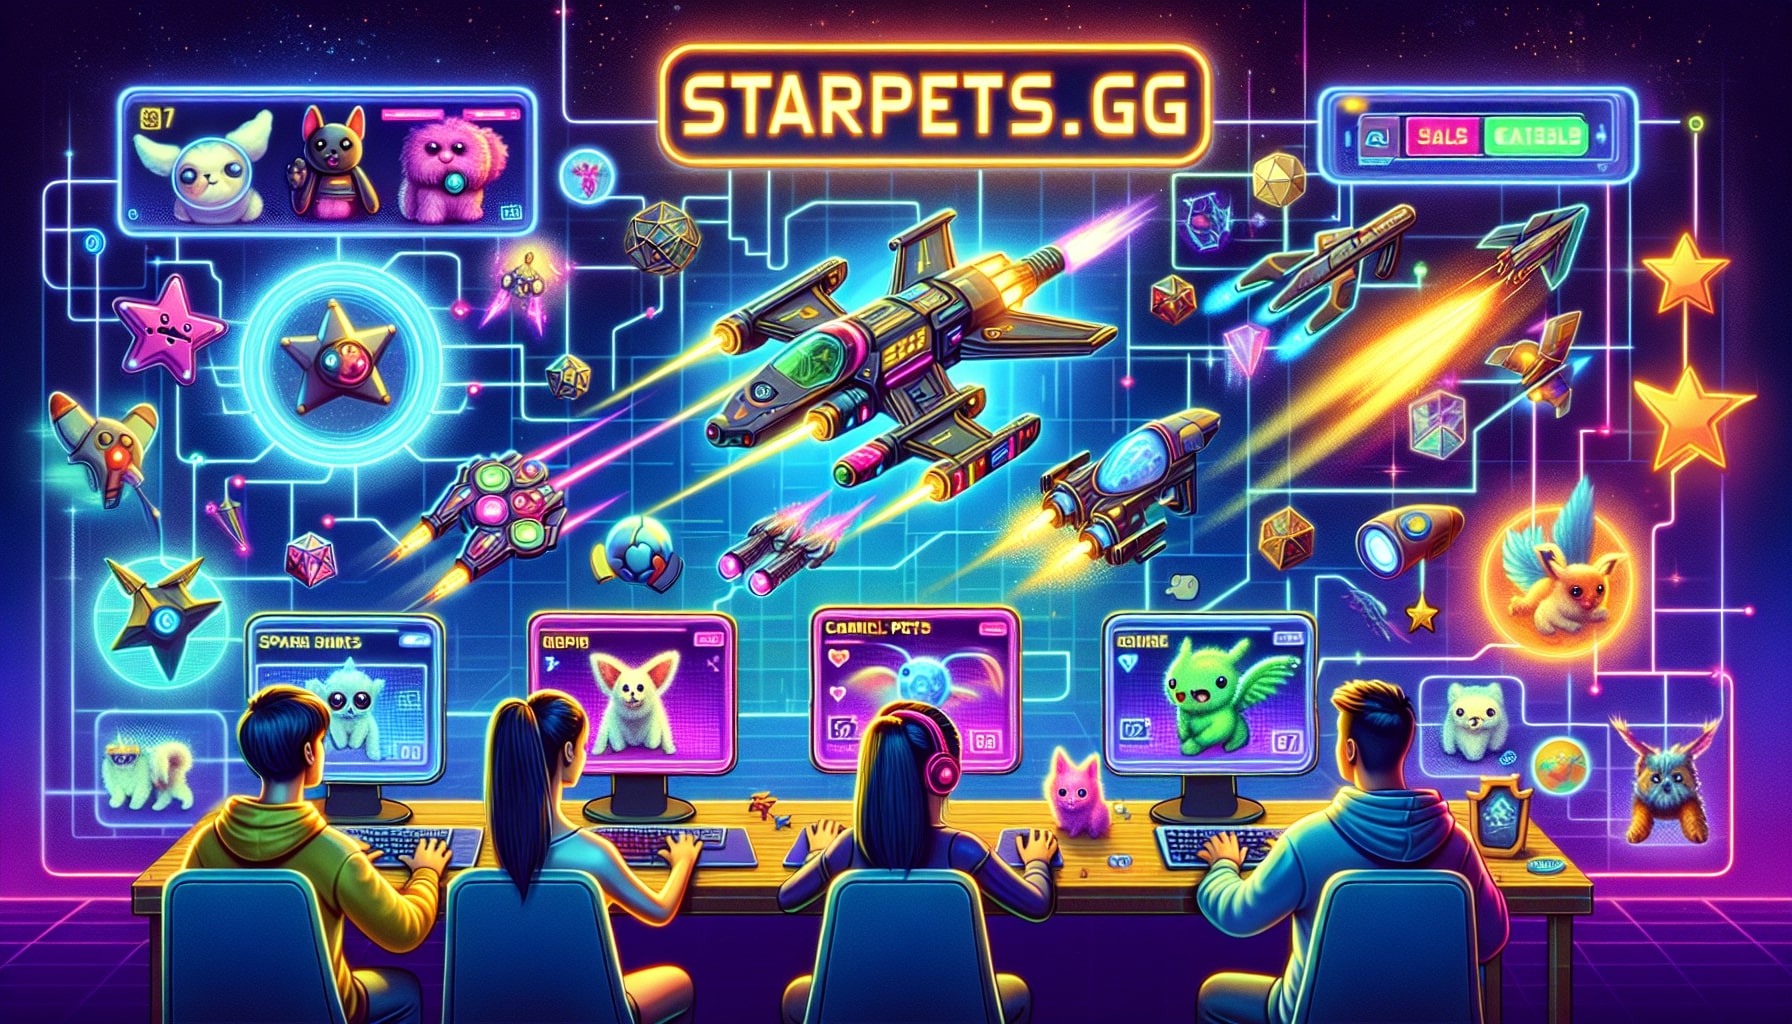 The New Era of Online Gaming Economy: Selling Game Items on Starpets.gg